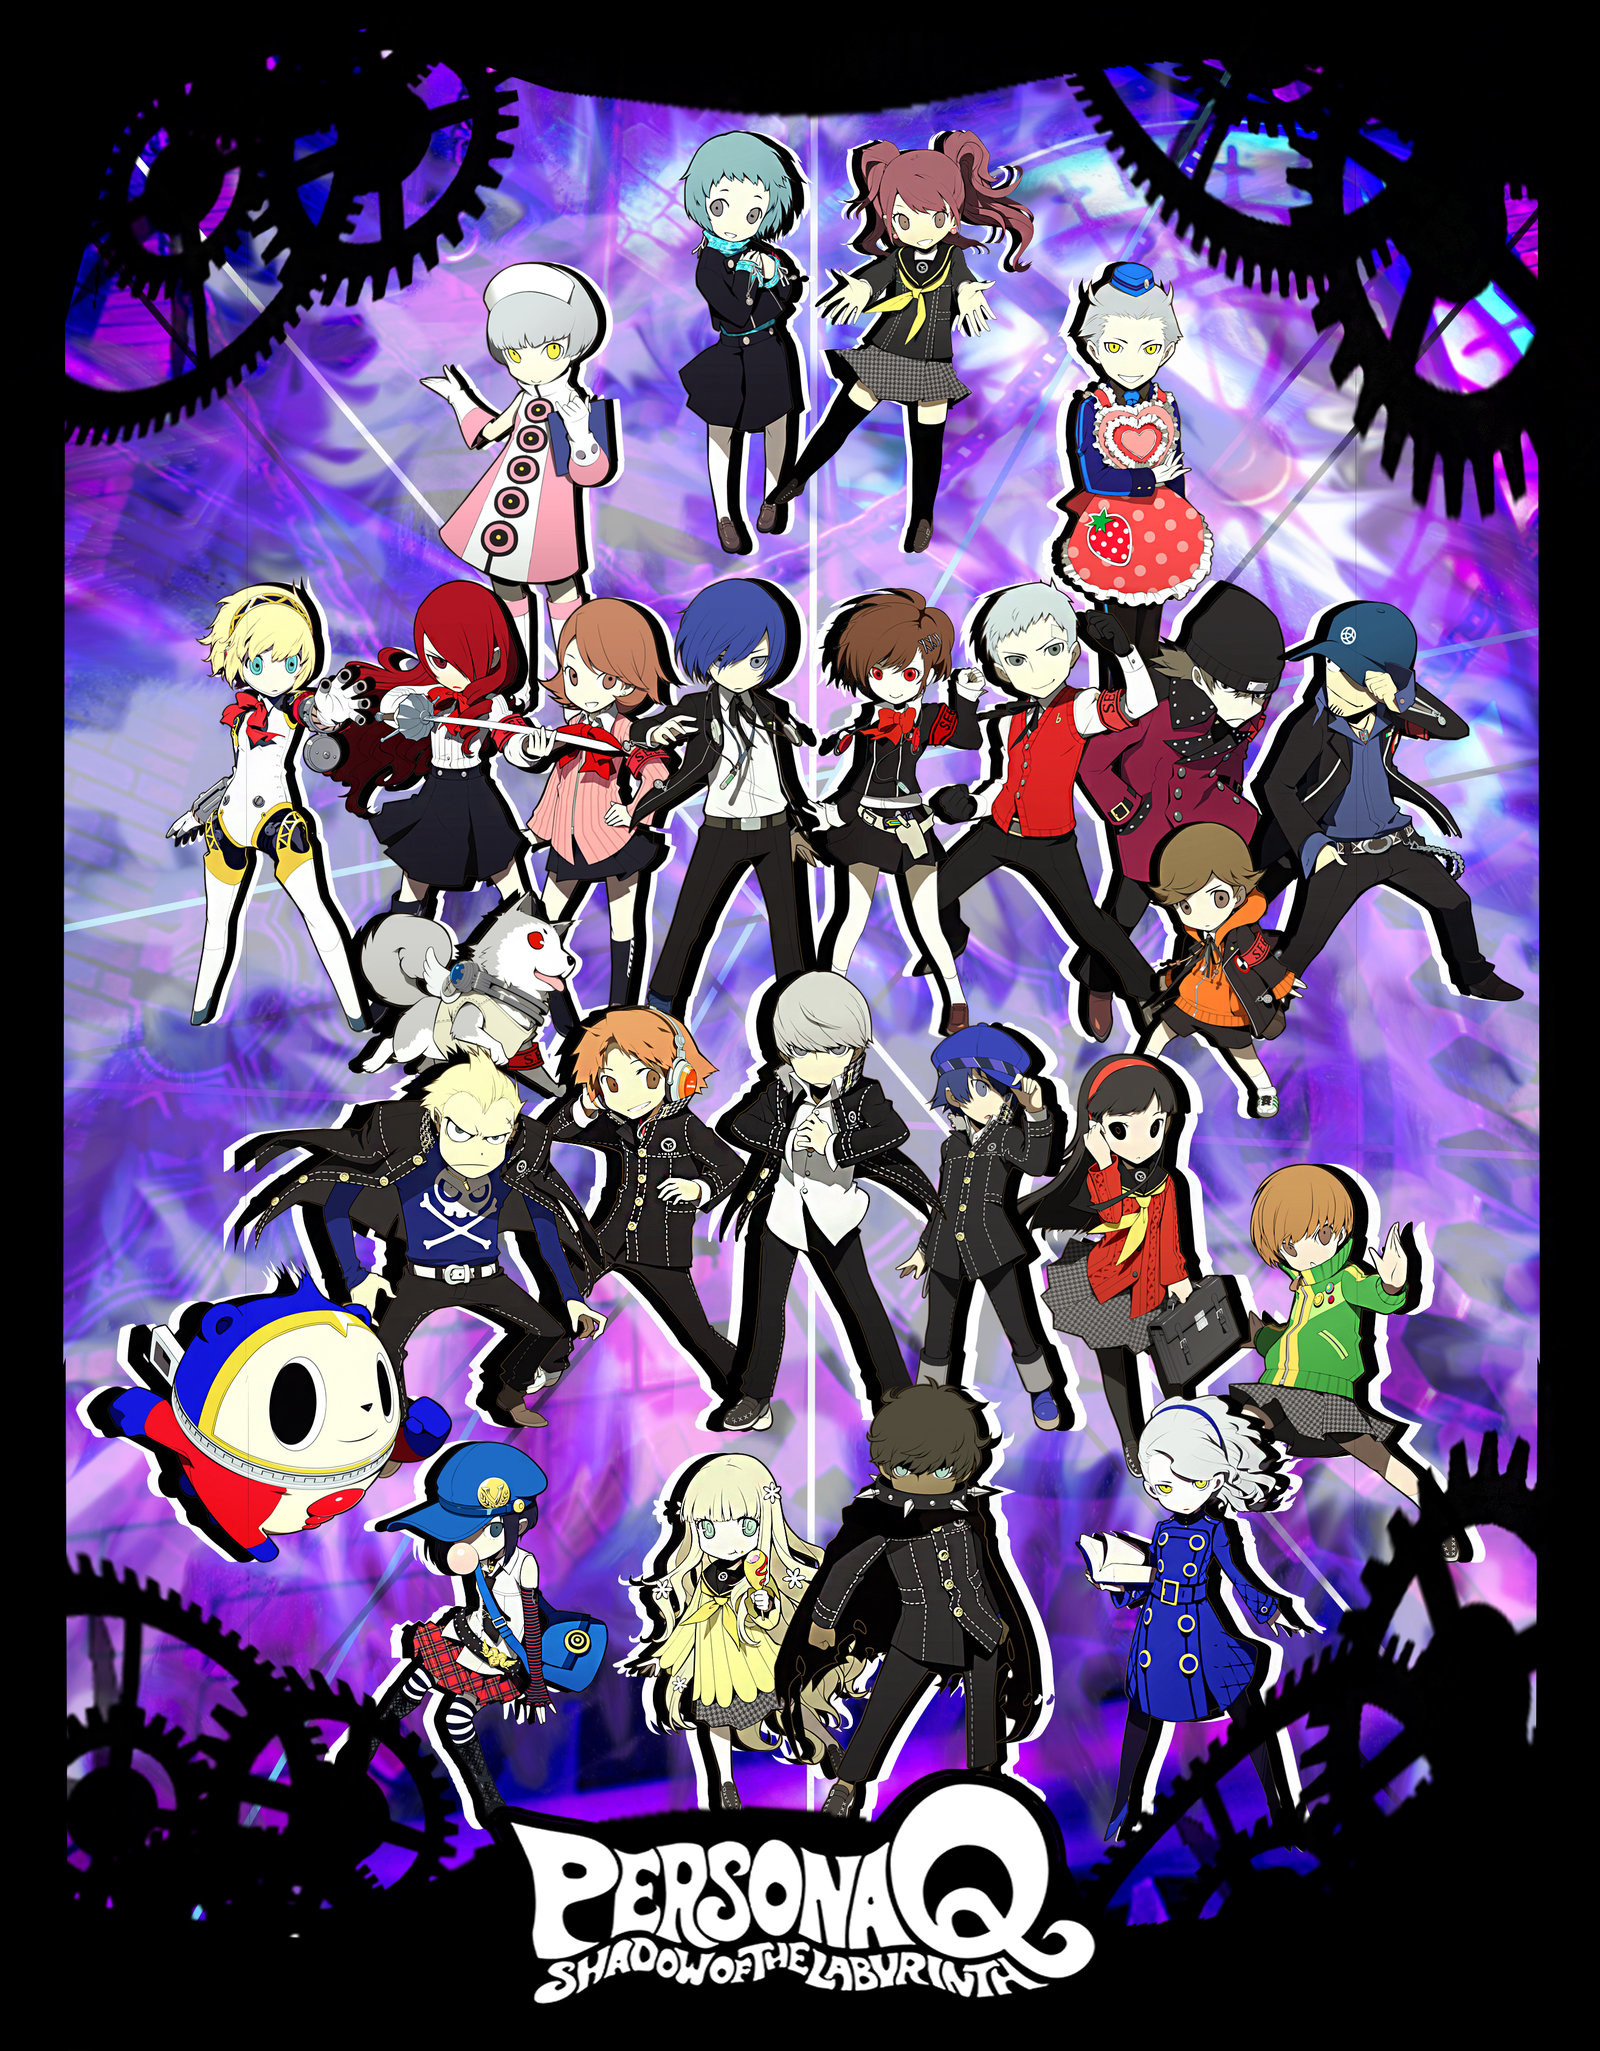 1600x2051 xMakeDamnSurex 41 25 Persona Q All P3 and P4 teams Poster by xMakeDamnSurex